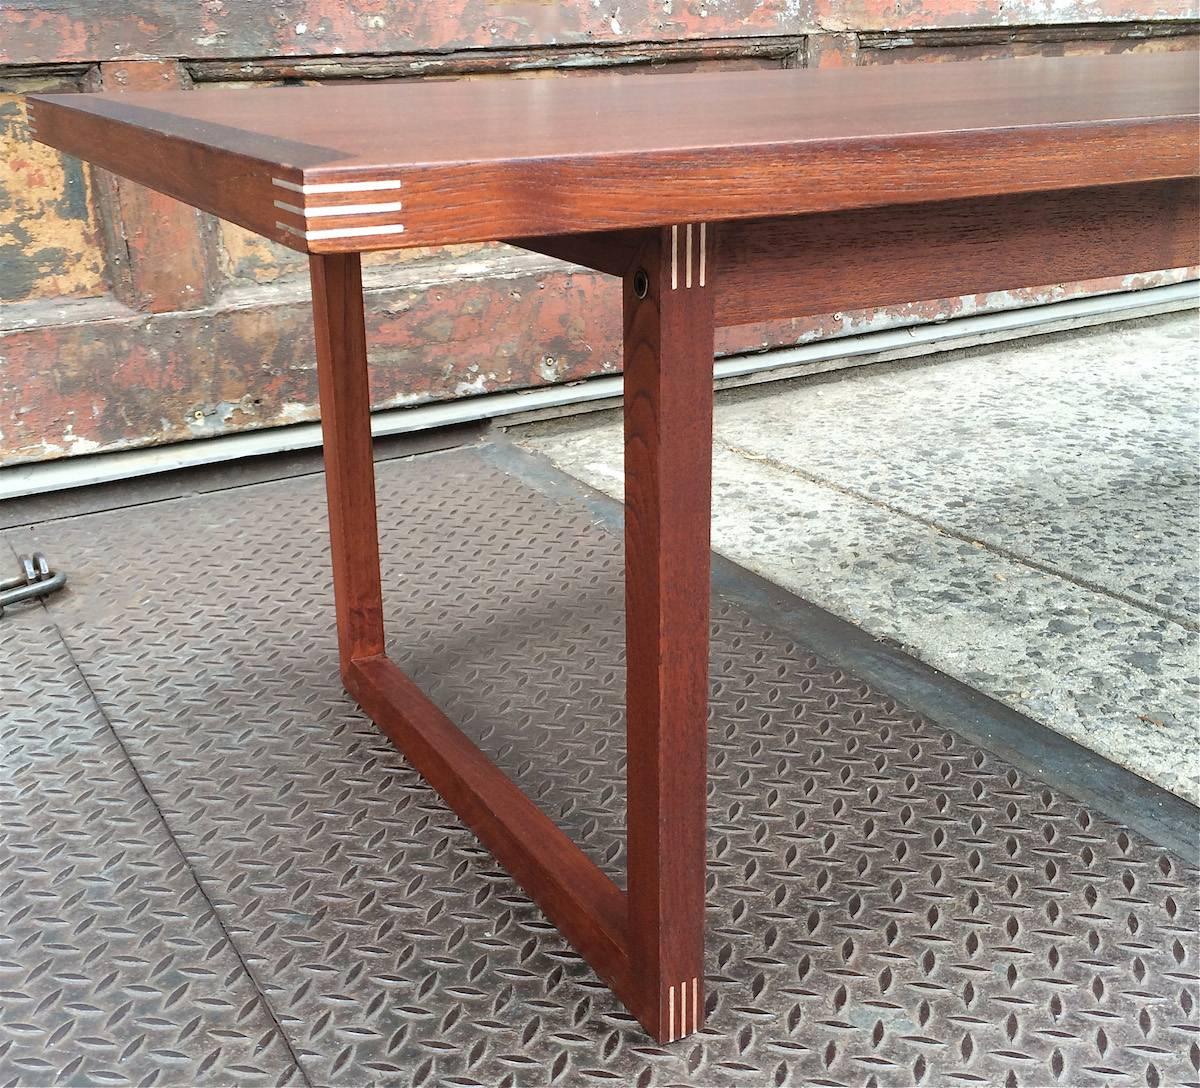 Mid-20th Century Danish Modern Rosewood Coffee Table by Rud Thygesen for Heltborg Møbler